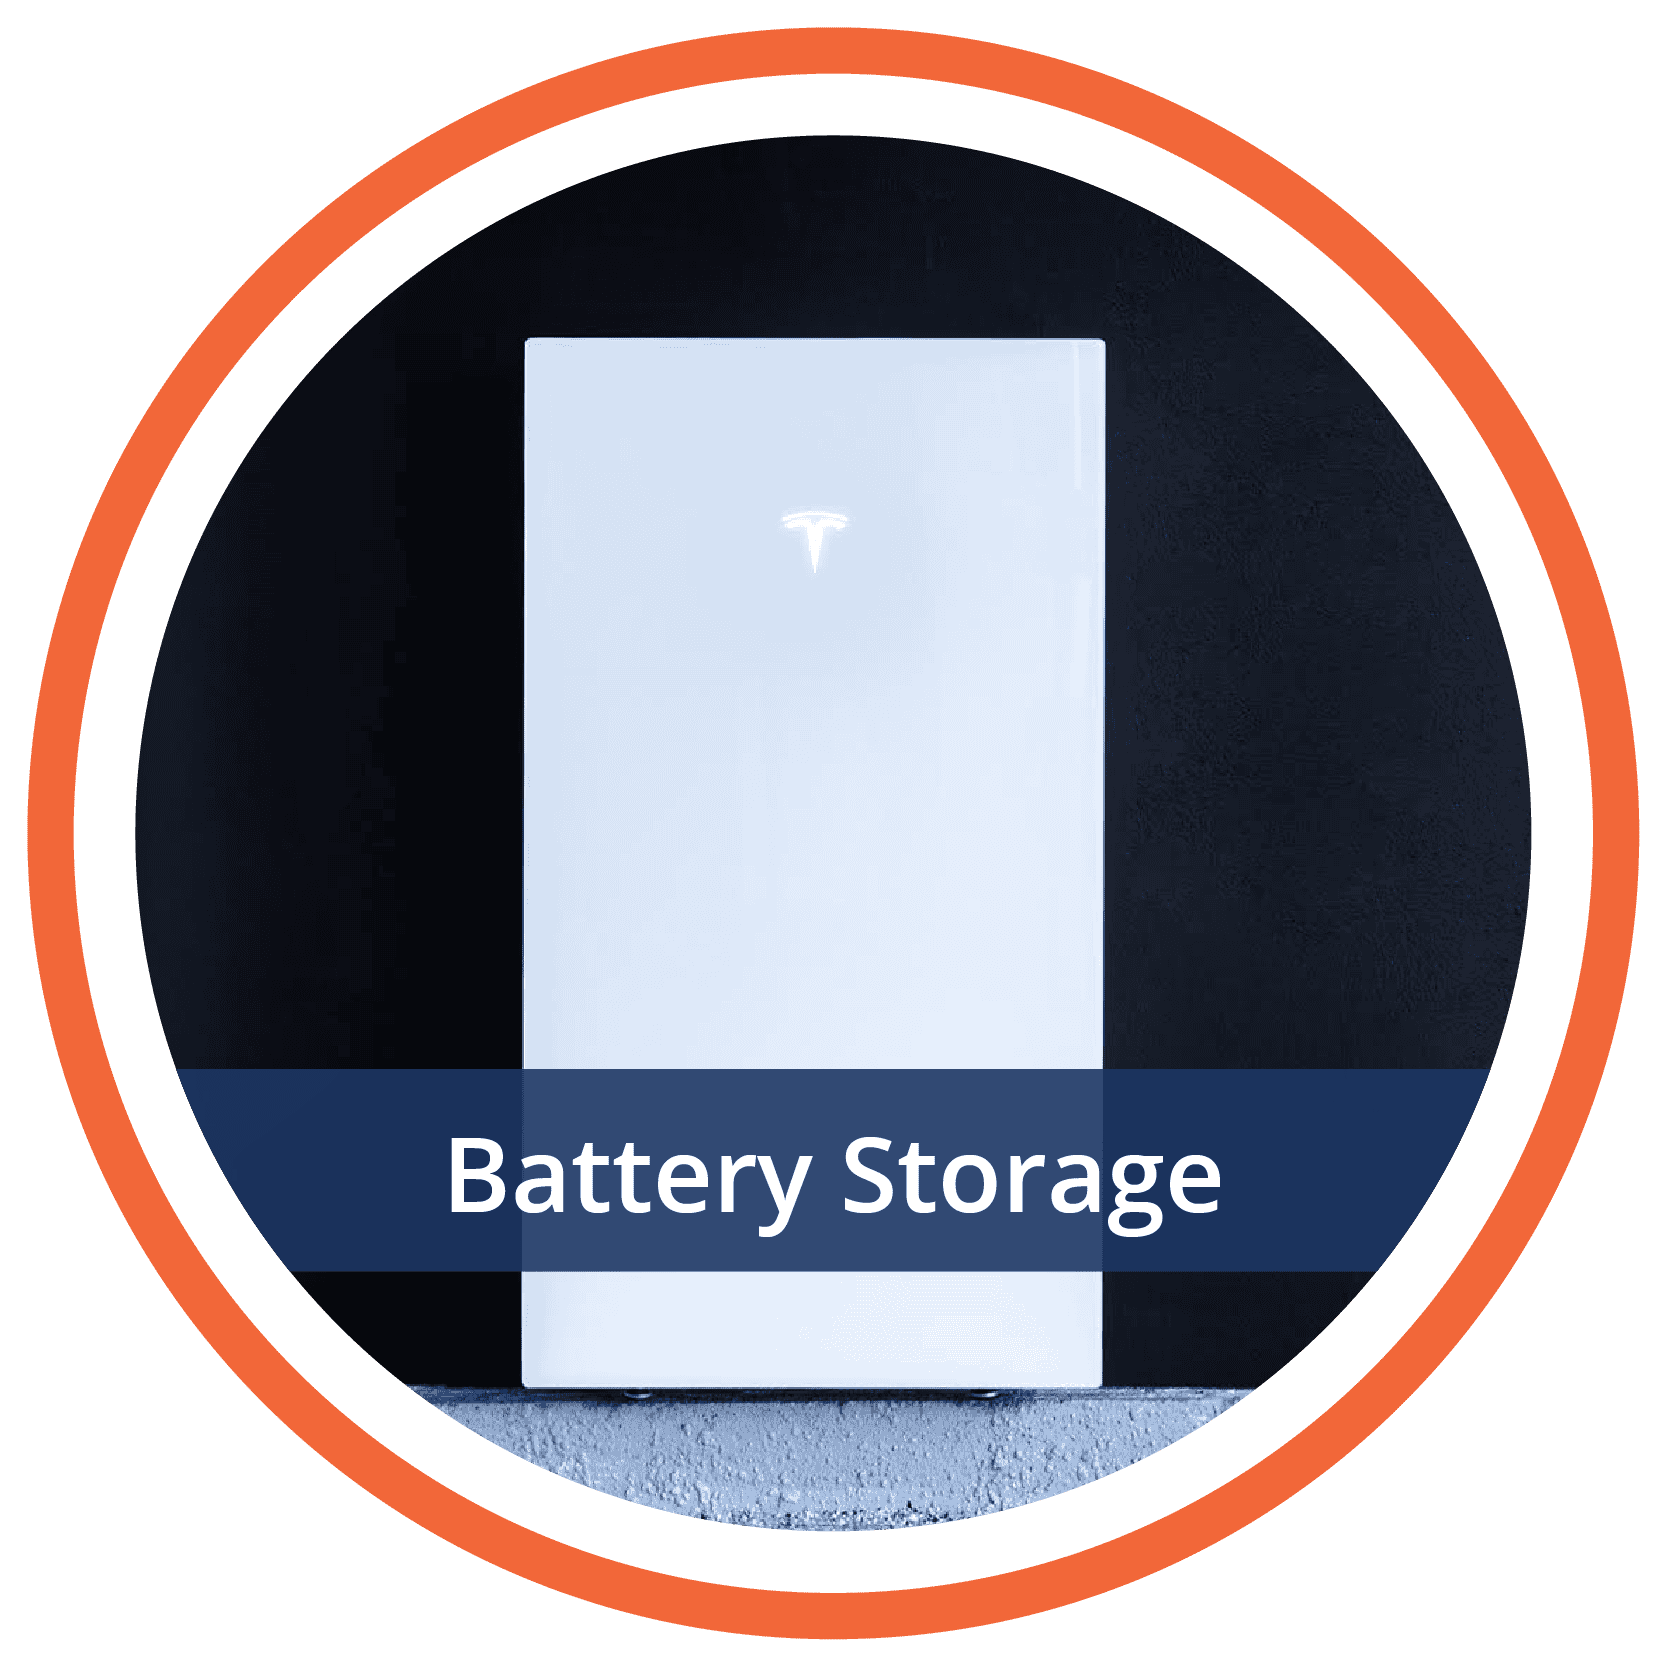 Tesla Powerwall battery storage unit, providing efficient energy storage and backup power for residential solar systems.